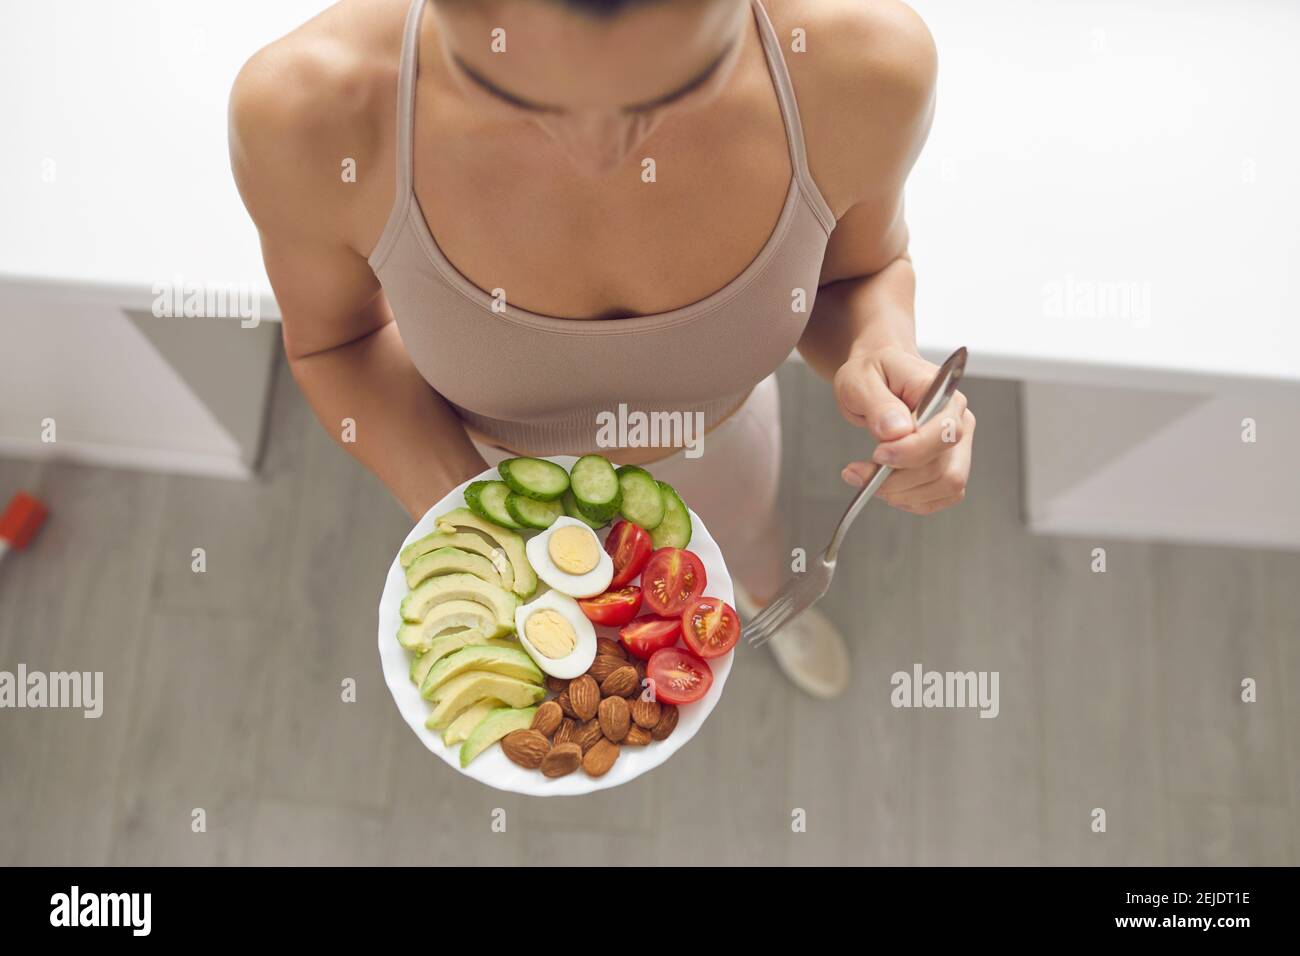 Woman having healthy meal of almonds, egg, sliced avocados, tomatoes and cucumbers Stock Photo